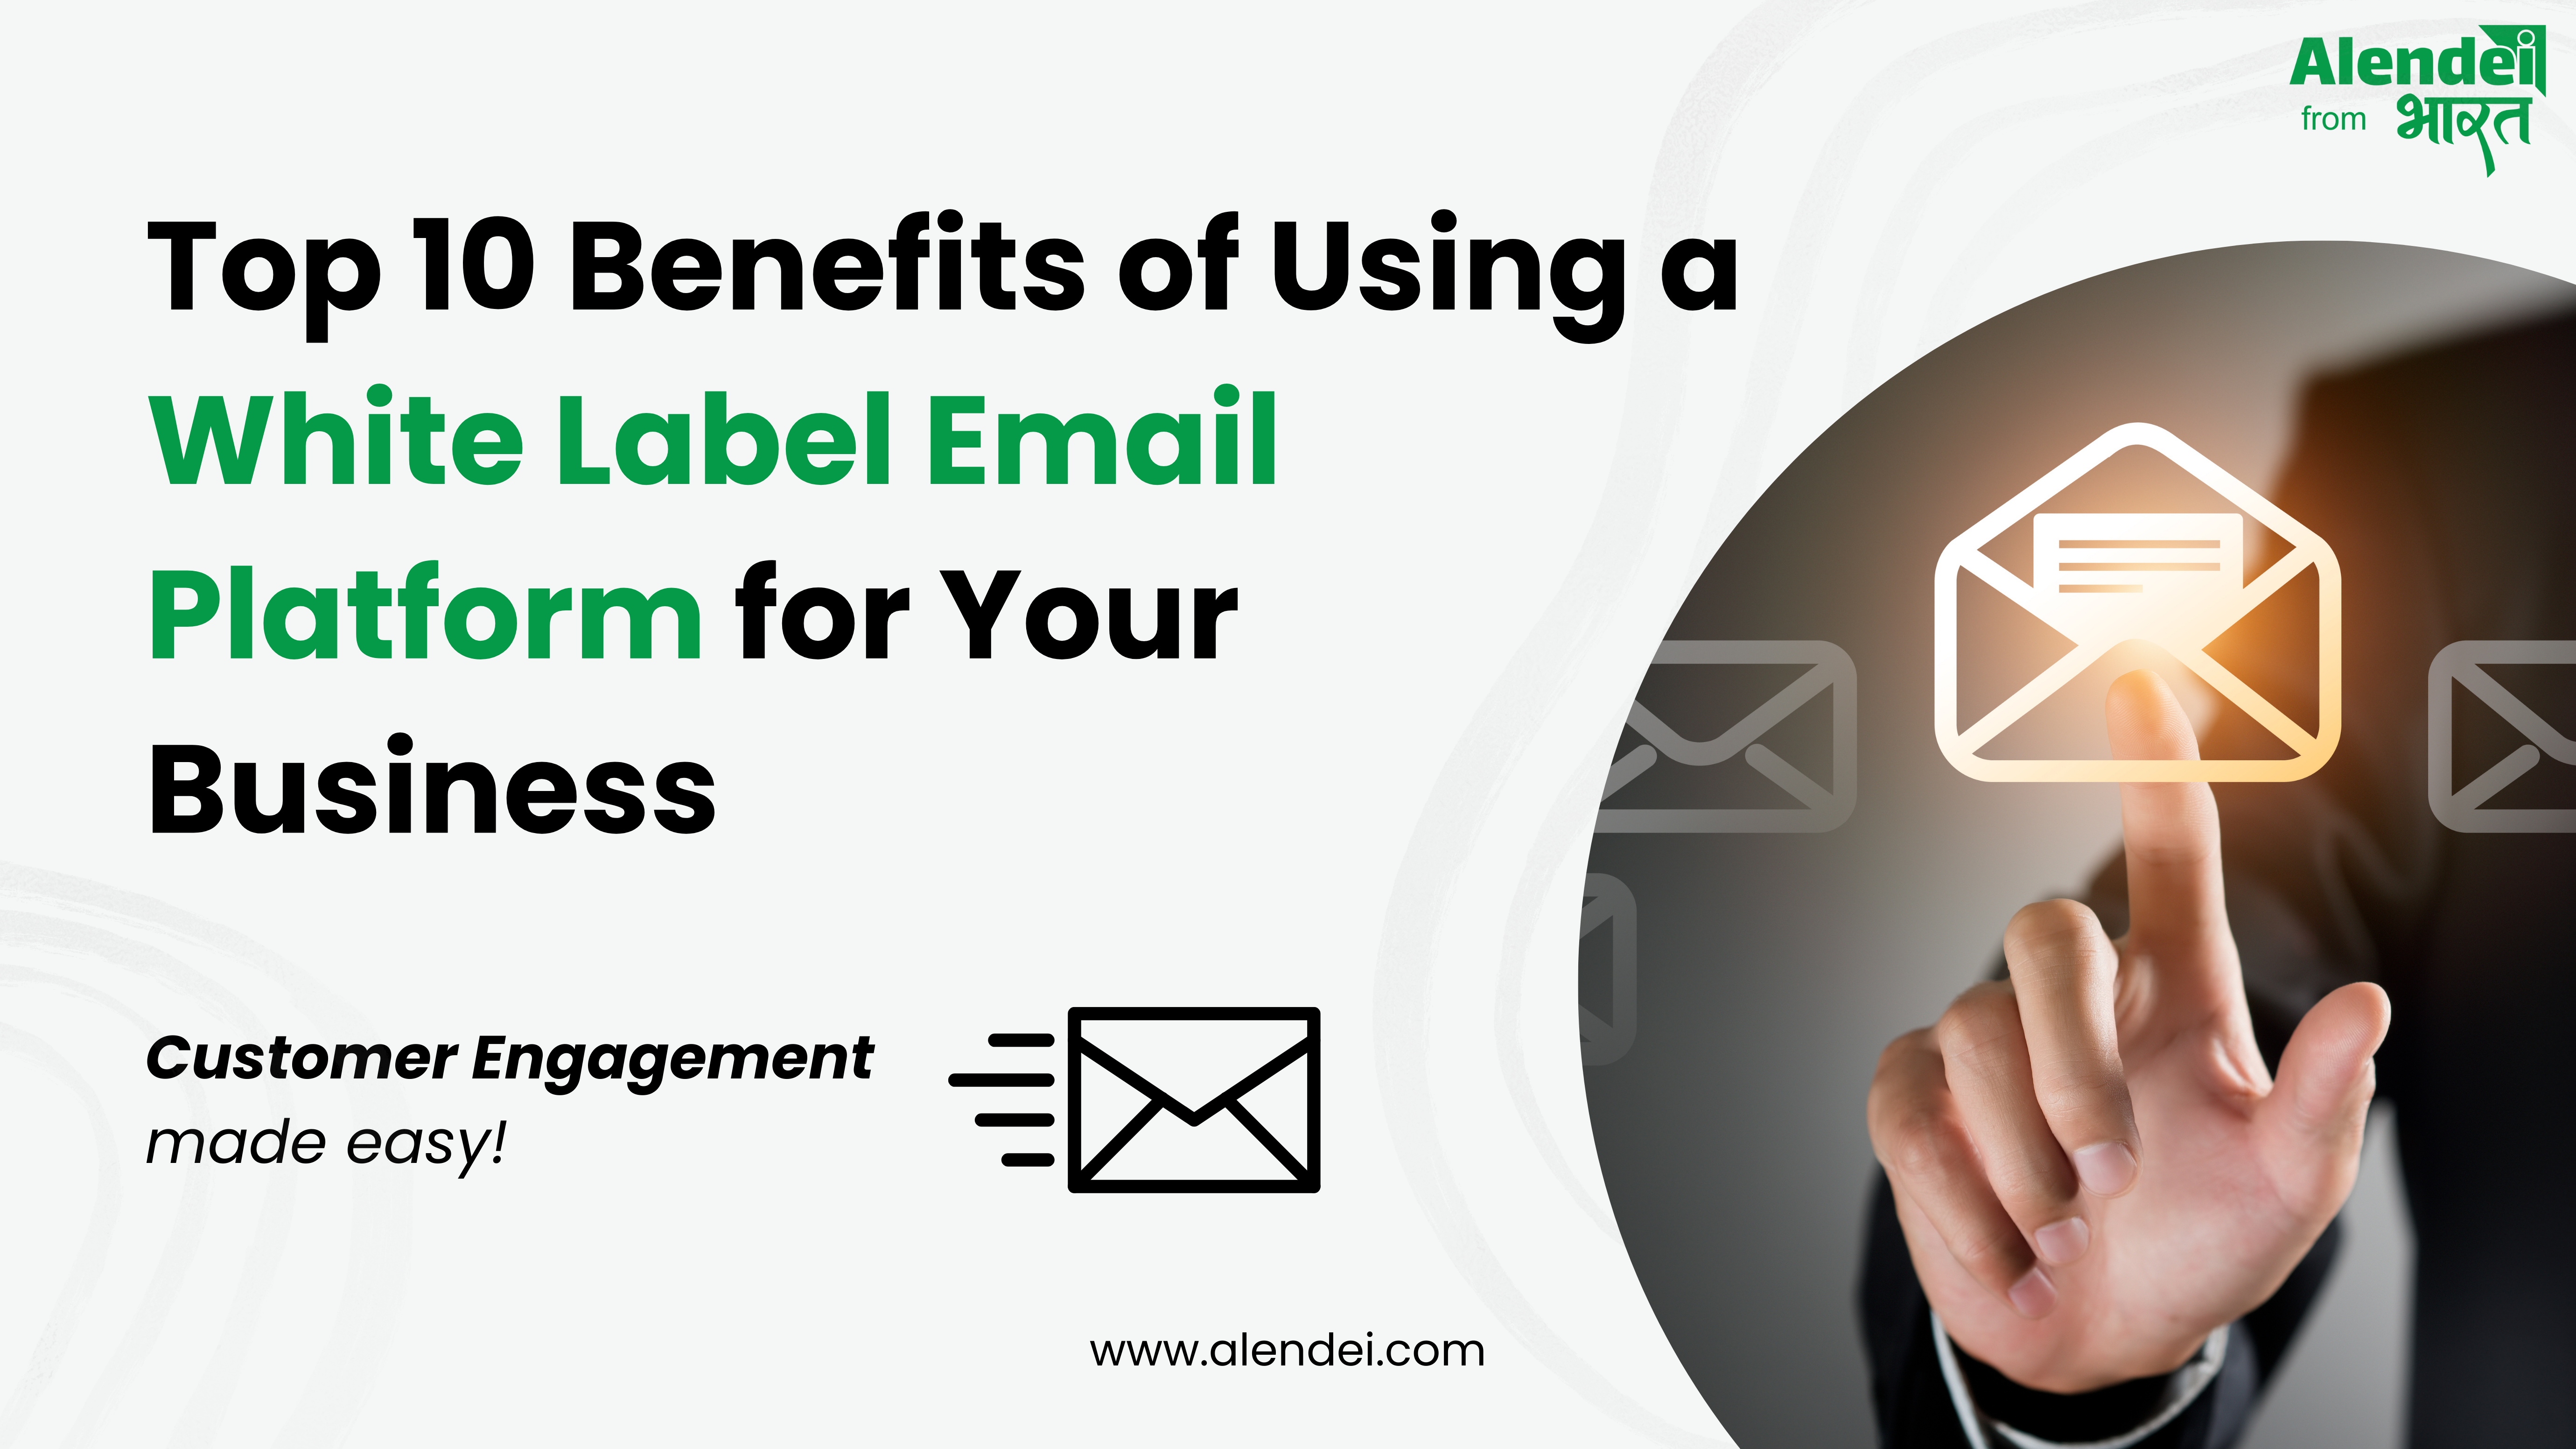 Top 10 Benefits of Using a White Label Email Platform for Your Business